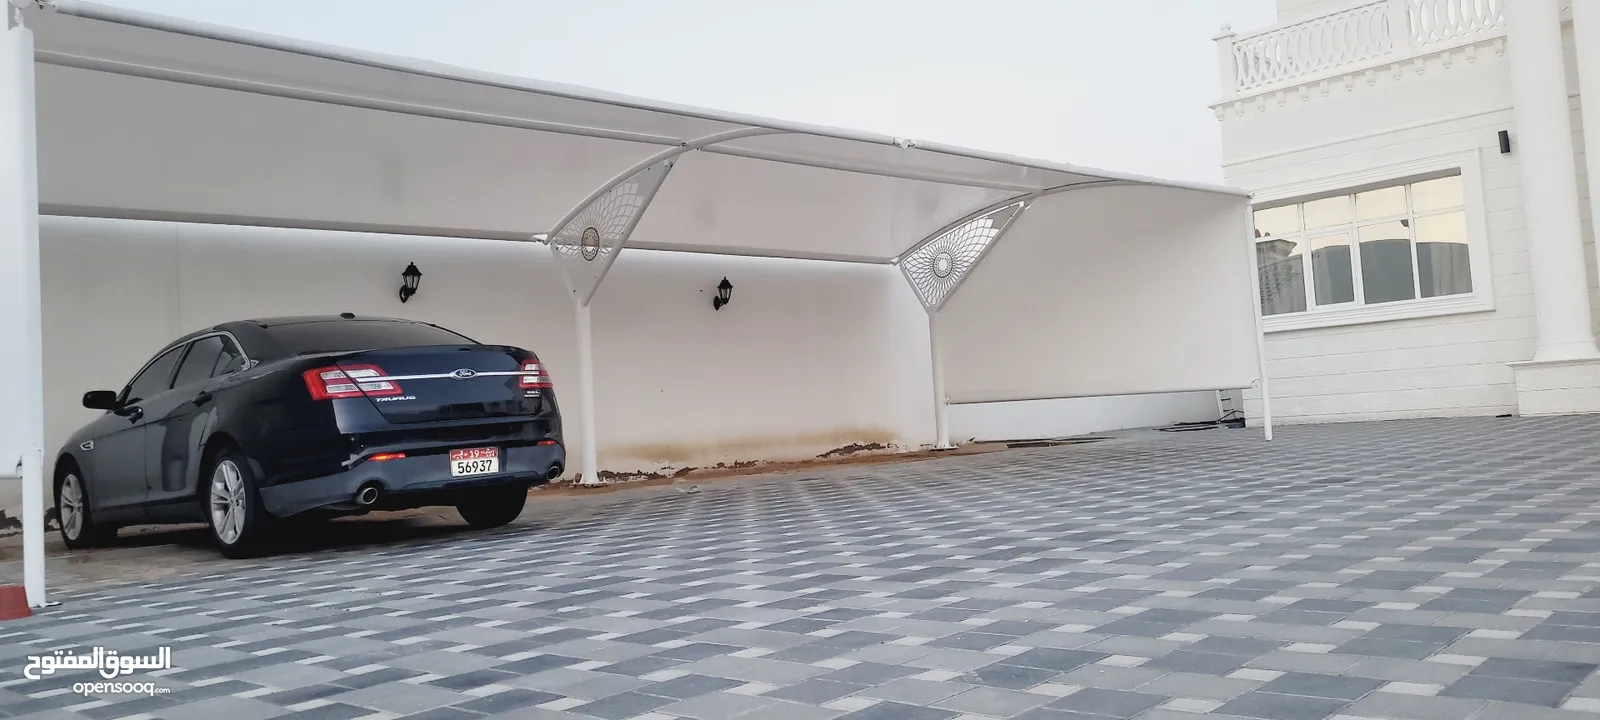 -We Make all types of Car Parking Shades in All our UAE